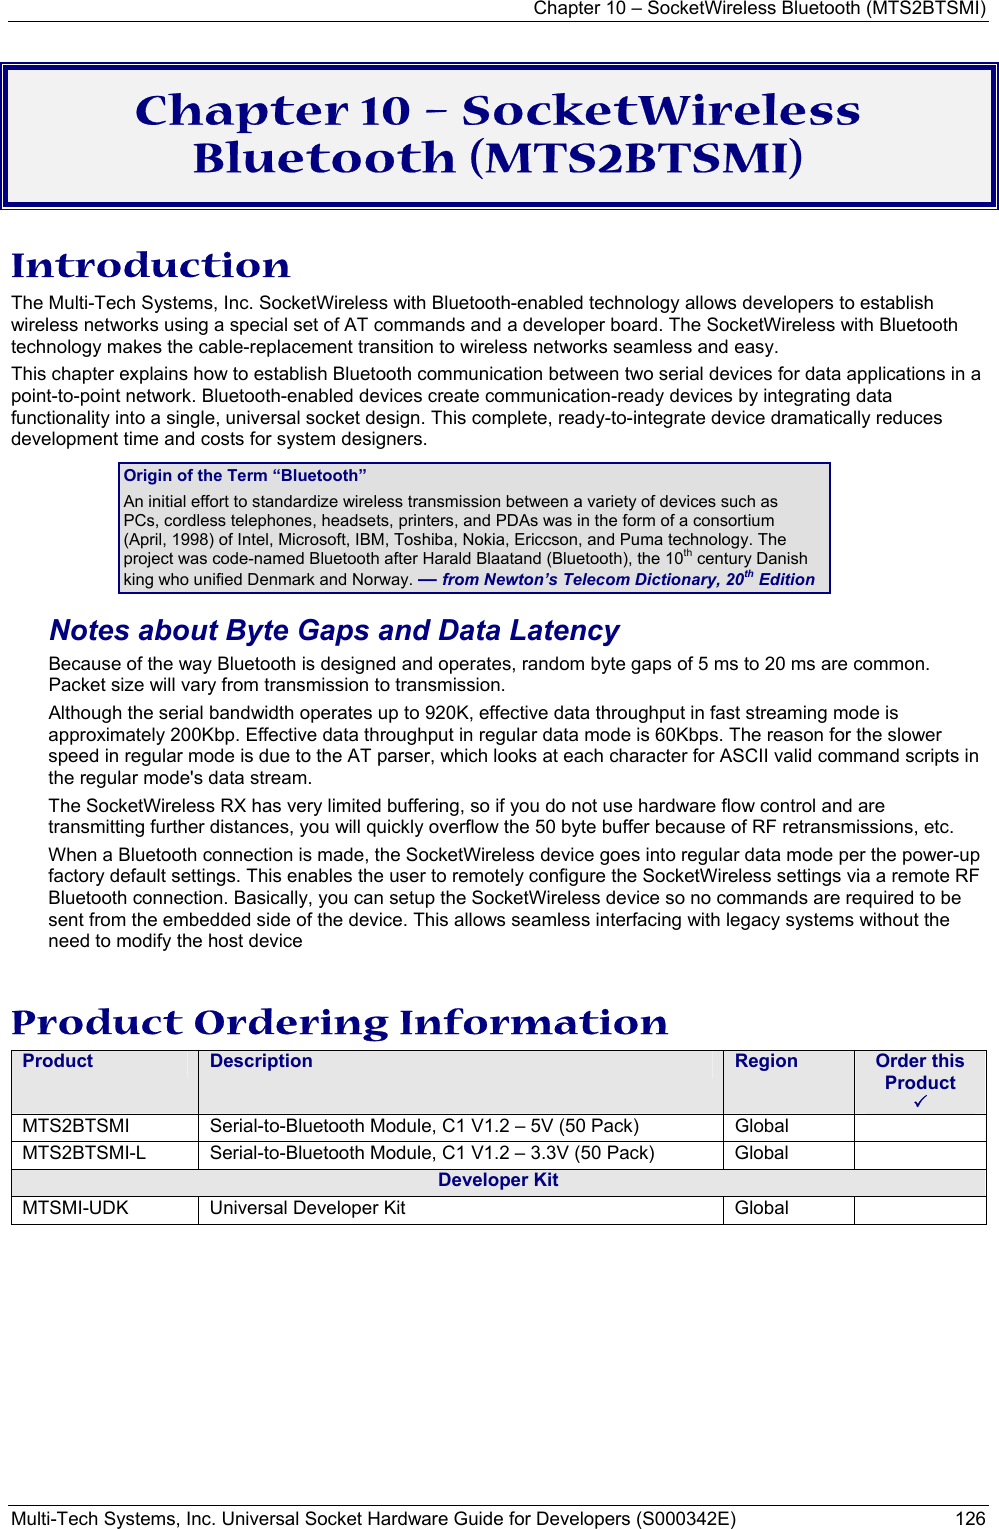 Chapter 10 – SocketWireless Bluetooth (MTS2BTSMI) Multi-Tech Systems, Inc. Universal Socket Hardware Guide for Developers (S000342E)  126  Chapter 10 – SocketWireless Bluetooth (MTS2BTSMI) Introduction The Multi-Tech Systems, Inc. SocketWireless with Bluetooth-enabled technology allows developers to establish wireless networks using a special set of AT commands and a developer board. The SocketWireless with Bluetooth technology makes the cable-replacement transition to wireless networks seamless and easy.  This chapter explains how to establish Bluetooth communication between two serial devices for data applications in a point-to-point network. Bluetooth-enabled devices create communication-ready devices by integrating data functionality into a single, universal socket design. This complete, ready-to-integrate device dramatically reduces development time and costs for system designers. Origin of the Term “Bluetooth” An initial effort to standardize wireless transmission between a variety of devices such as PCs, cordless telephones, headsets, printers, and PDAs was in the form of a consortium (April, 1998) of Intel, Microsoft, IBM, Toshiba, Nokia, Ericcson, and Puma technology. The project was code-named Bluetooth after Harald Blaatand (Bluetooth), the 10th century Danish king who unified Denmark and Norway. — from Newton’s Telecom Dictionary, 20th Edition Notes about Byte Gaps and Data Latency Because of the way Bluetooth is designed and operates, random byte gaps of 5 ms to 20 ms are common. Packet size will vary from transmission to transmission.  Although the serial bandwidth operates up to 920K, effective data throughput in fast streaming mode is approximately 200Kbp. Effective data throughput in regular data mode is 60Kbps. The reason for the slower speed in regular mode is due to the AT parser, which looks at each character for ASCII valid command scripts in the regular mode&apos;s data stream.  The SocketWireless RX has very limited buffering, so if you do not use hardware flow control and are transmitting further distances, you will quickly overflow the 50 byte buffer because of RF retransmissions, etc.   When a Bluetooth connection is made, the SocketWireless device goes into regular data mode per the power-up factory default settings. This enables the user to remotely configure the SocketWireless settings via a remote RF Bluetooth connection. Basically, you can setup the SocketWireless device so no commands are required to be sent from the embedded side of the device. This allows seamless interfacing with legacy systems without the need to modify the host device  Product Ordering Information Product  Description  Region  Order this Product   3 MTS2BTSMI Serial-to-Bluetooth Module, C1 V1.2 – 5V (50 Pack)    Global   MTS2BTSMI-L  Serial-to-Bluetooth Module, C1 V1.2 – 3.3V (50 Pack)     Global   Developer Kit MTSMI-UDK  Universal Developer Kit  Global     